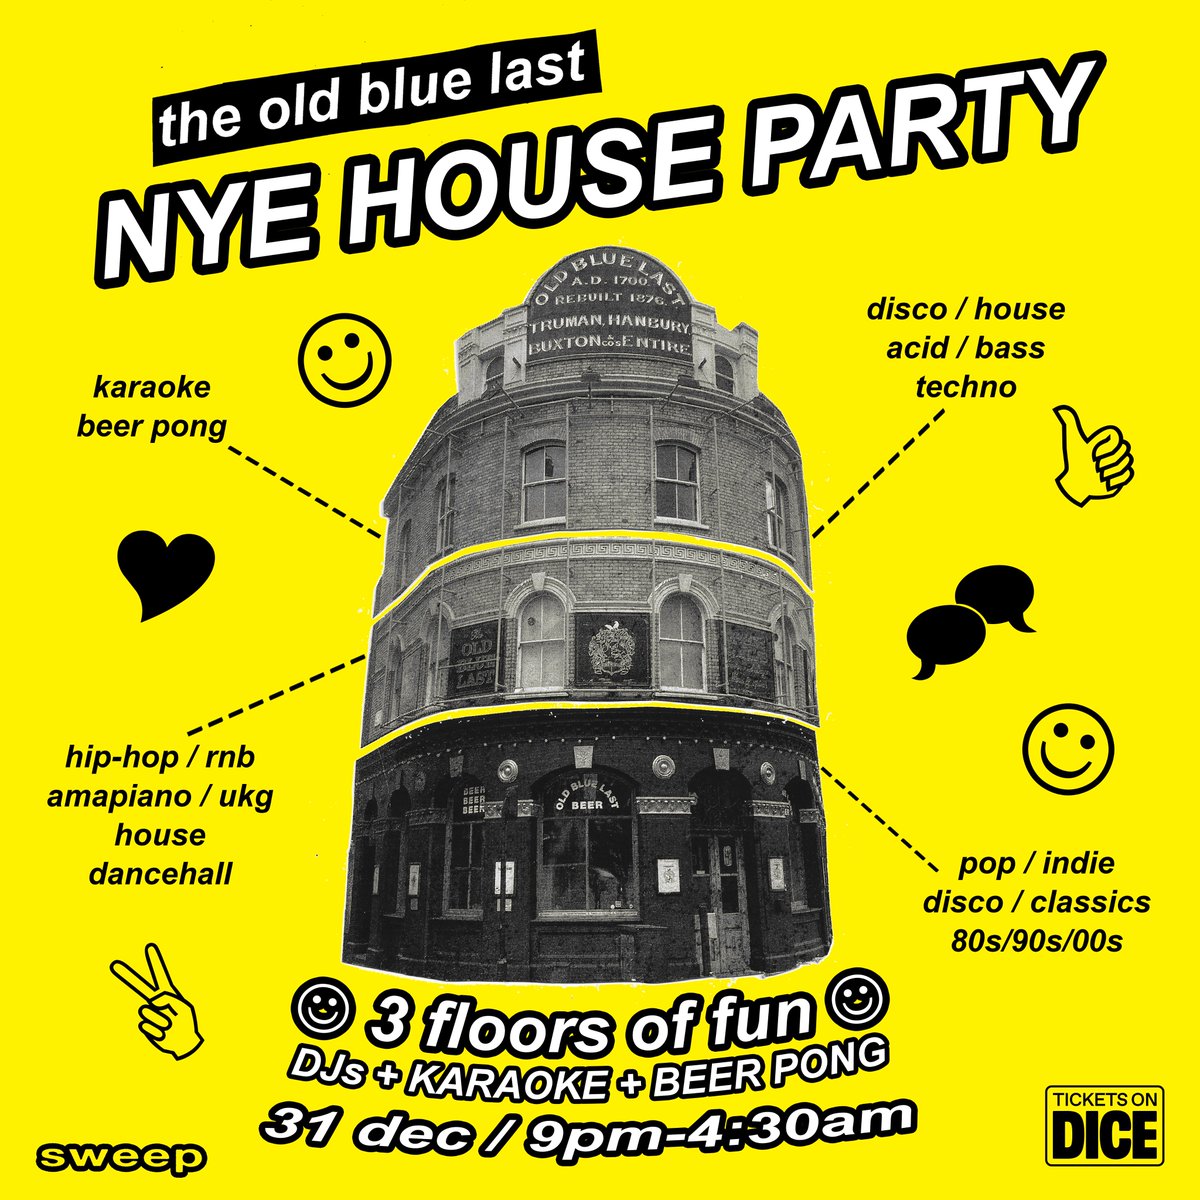 It's The Old Blue Last NYE House Party! The legendary Old Blue Last House Party is back and bigger than ever! We've got an absolute mad one for you with 3 floors of DJs + karaoke + beer pong. Expect bevs, balloons and big tunes. 🎉🎈 Tickets: dice.fm/event/wm2xx-ol…